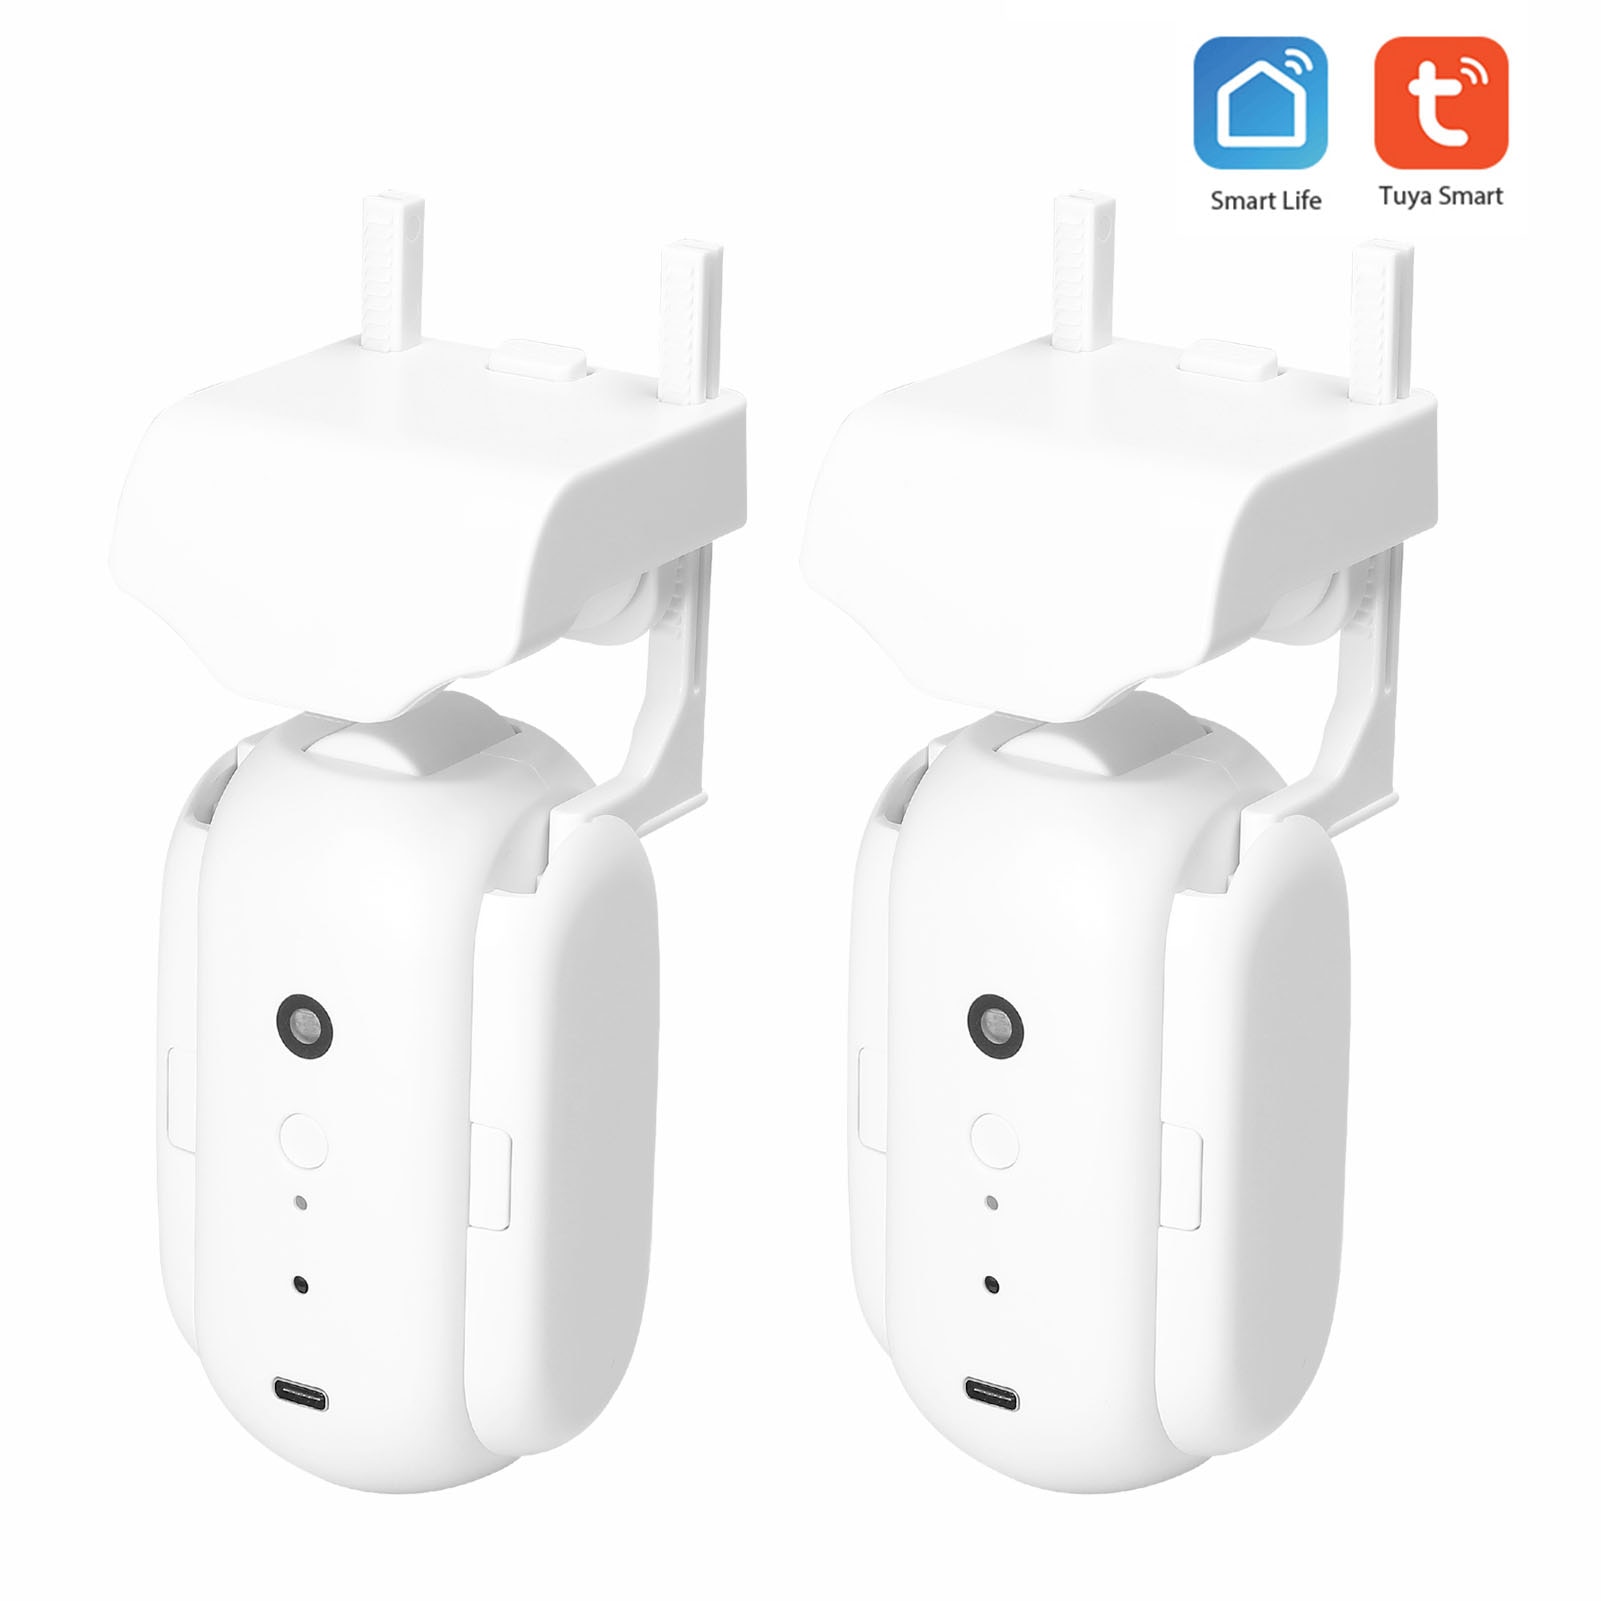 Official product marketing photo showing two curtain robots